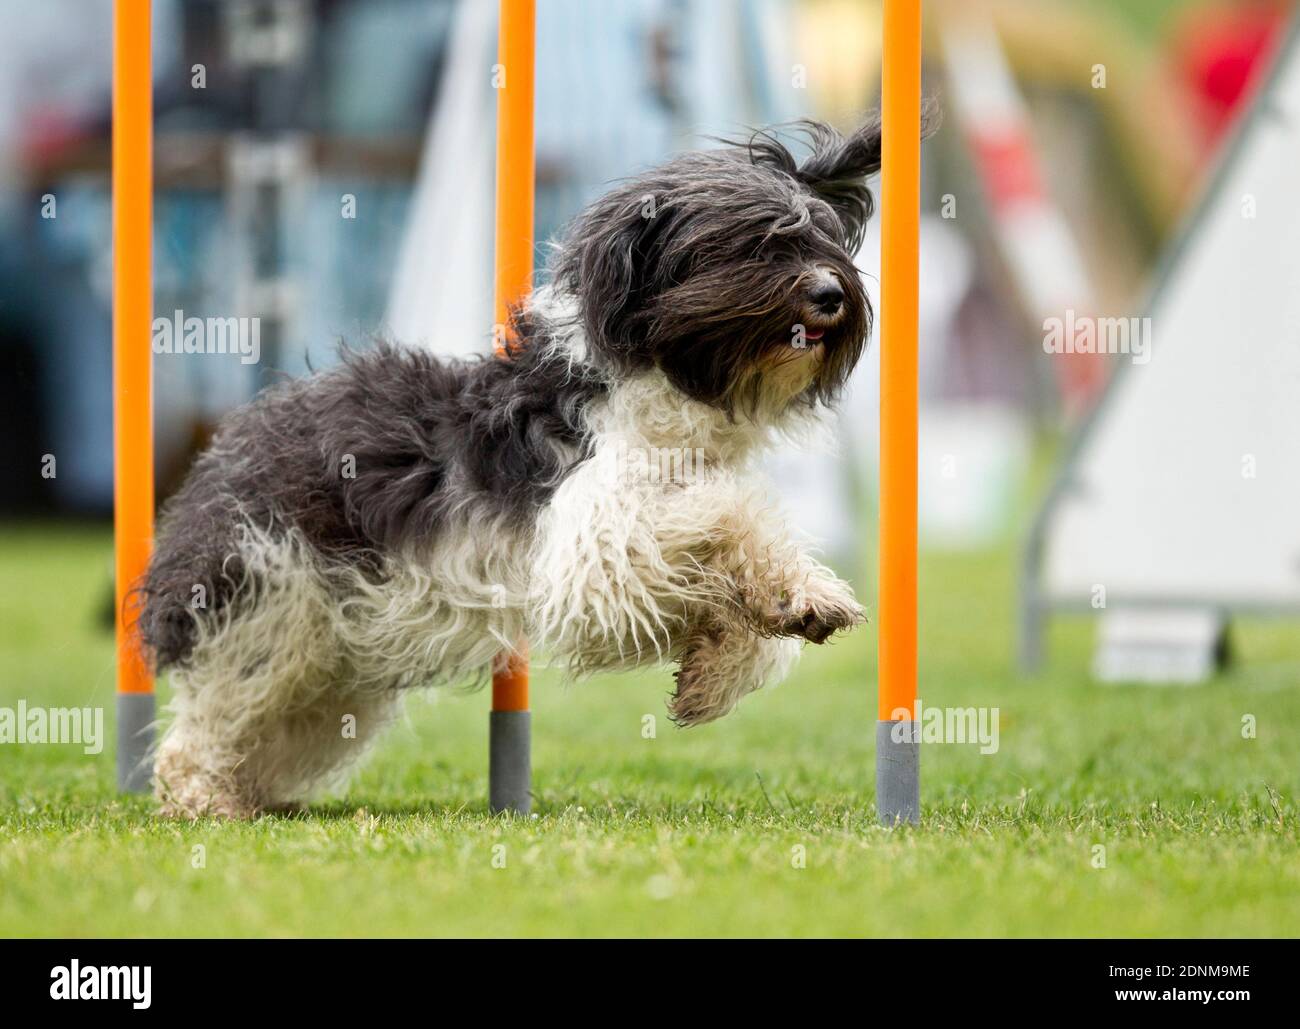 Dutch Sheepdog. Adult demonstrating fast weave poles in an obstacle course. Germany Stock Photo